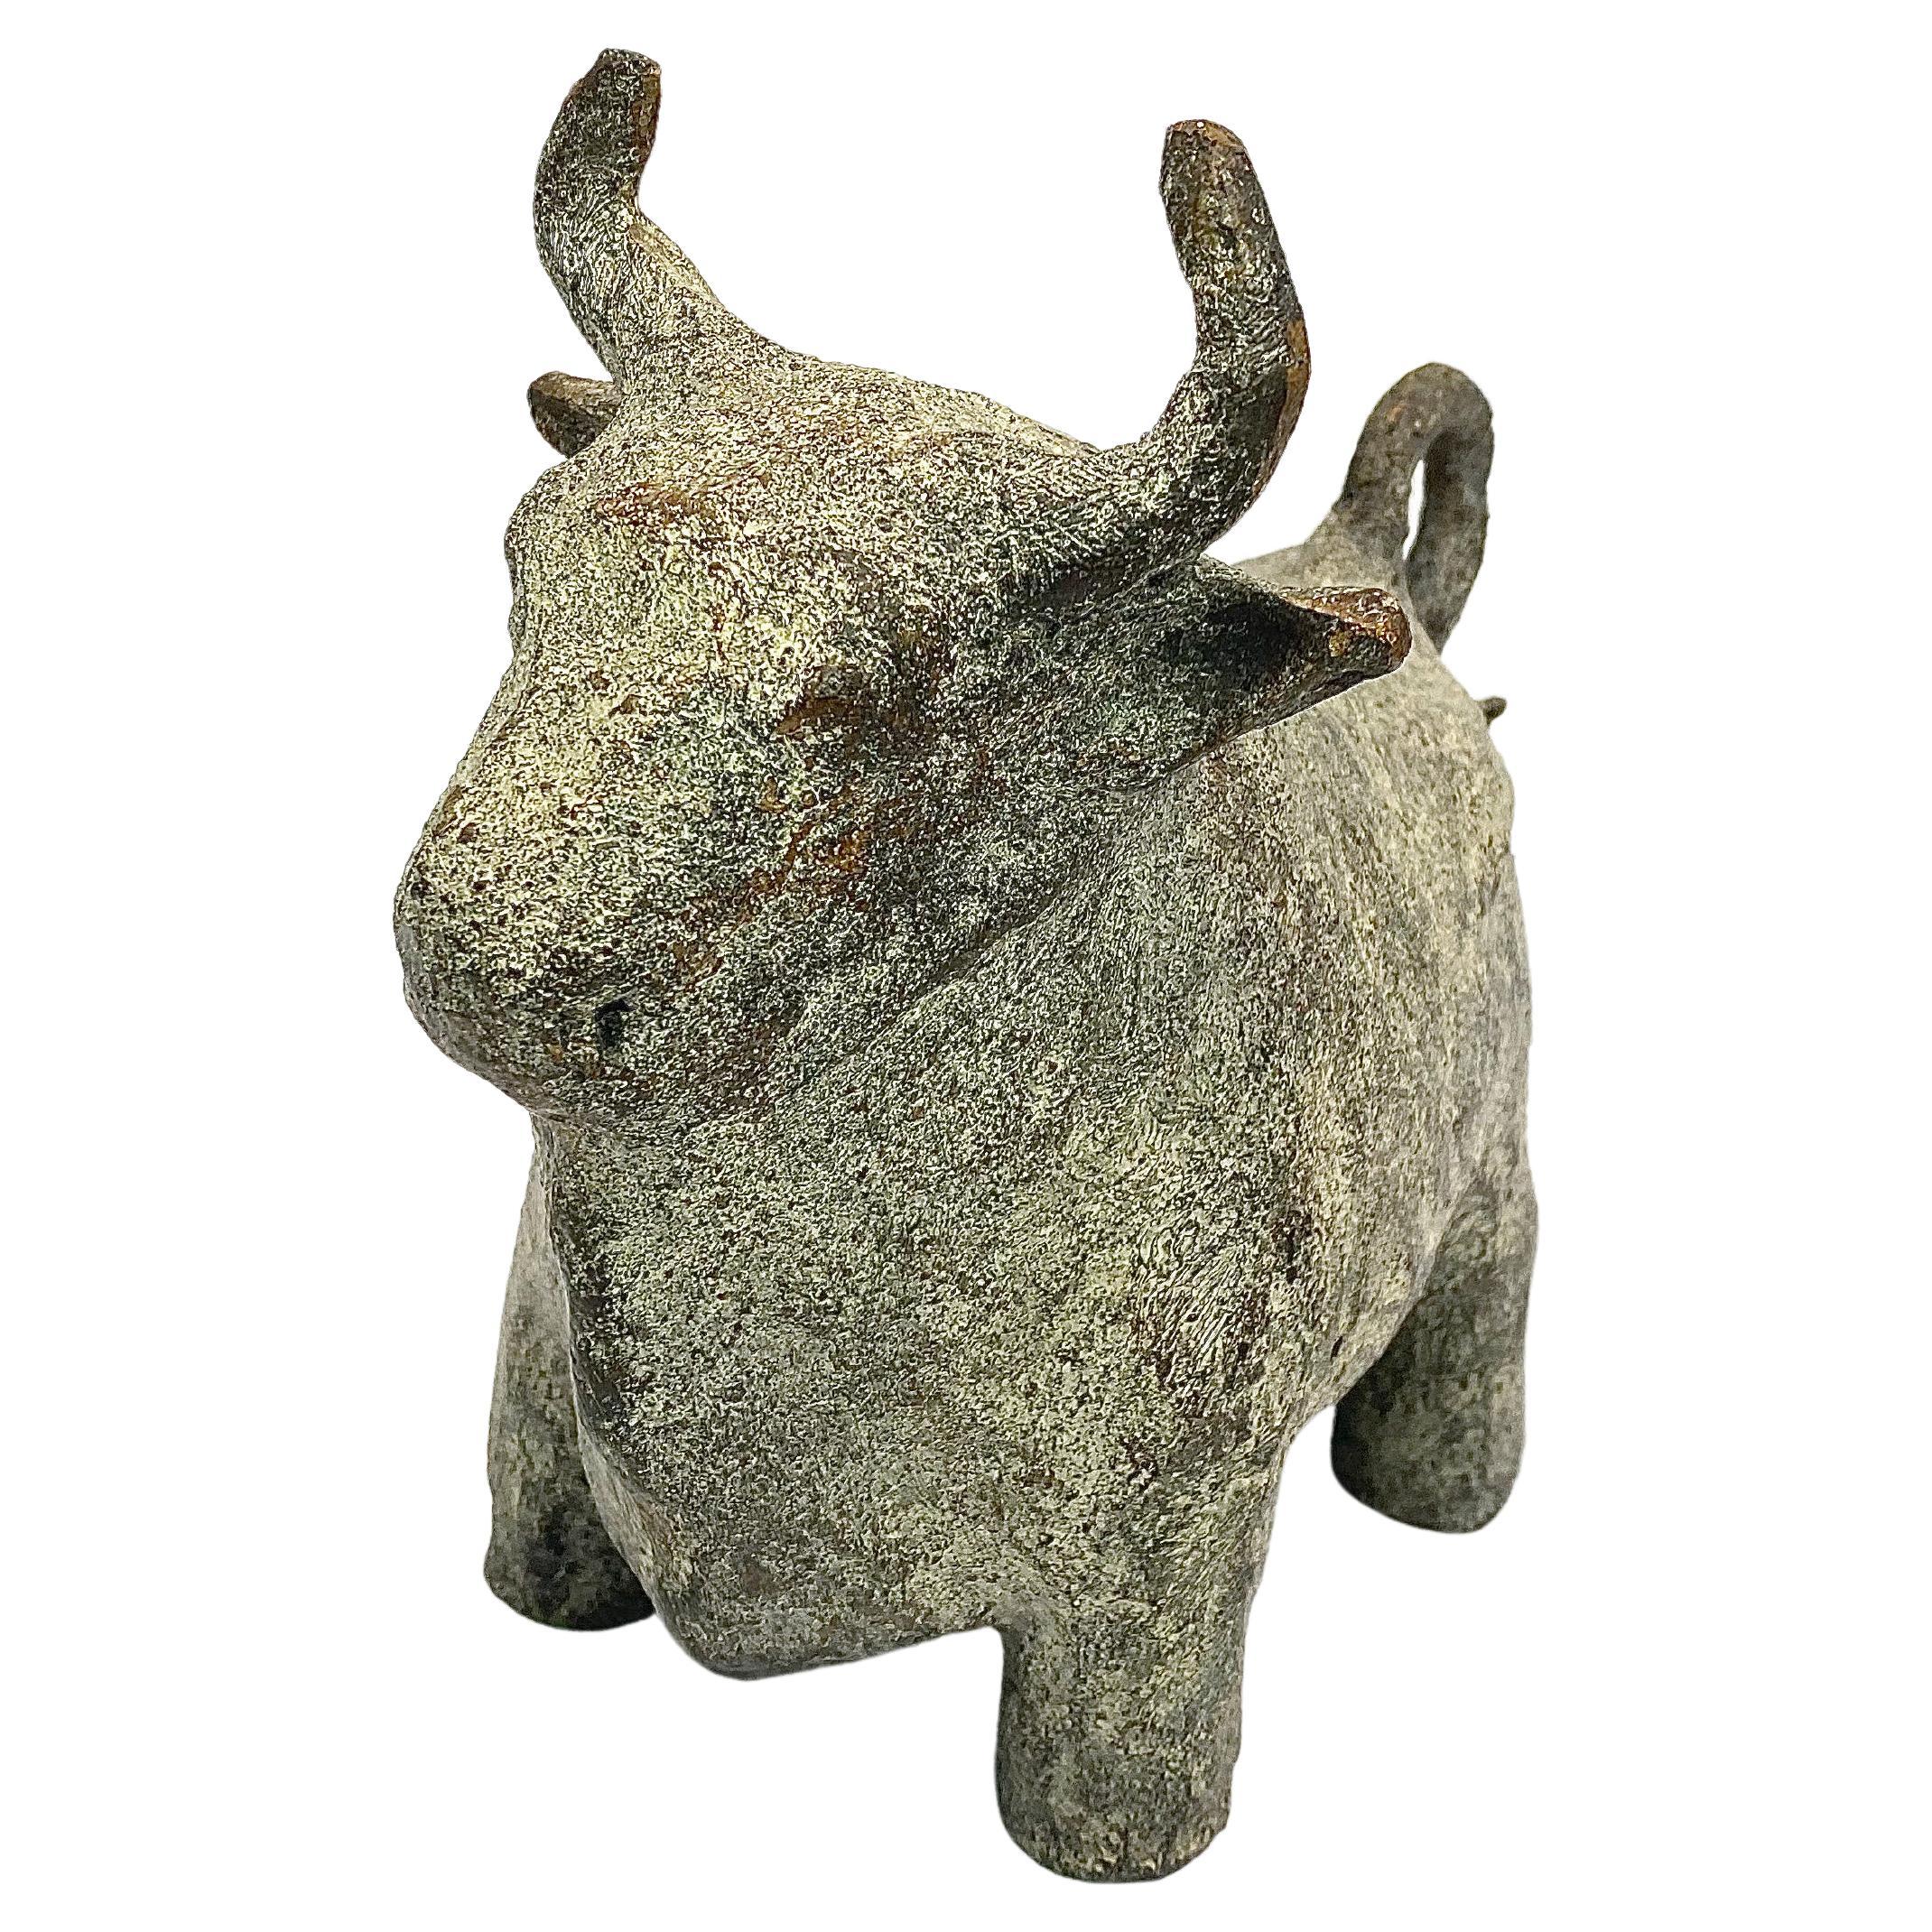 Sculpture representing a bull in bronze. Created by an original terracotta sculpture by Véronique Motte.
Signed and numbered 1/8. 

The Anne Jacquemin Sablon gallery opened its doors to the public in 2015. It is a space dedicated to design and